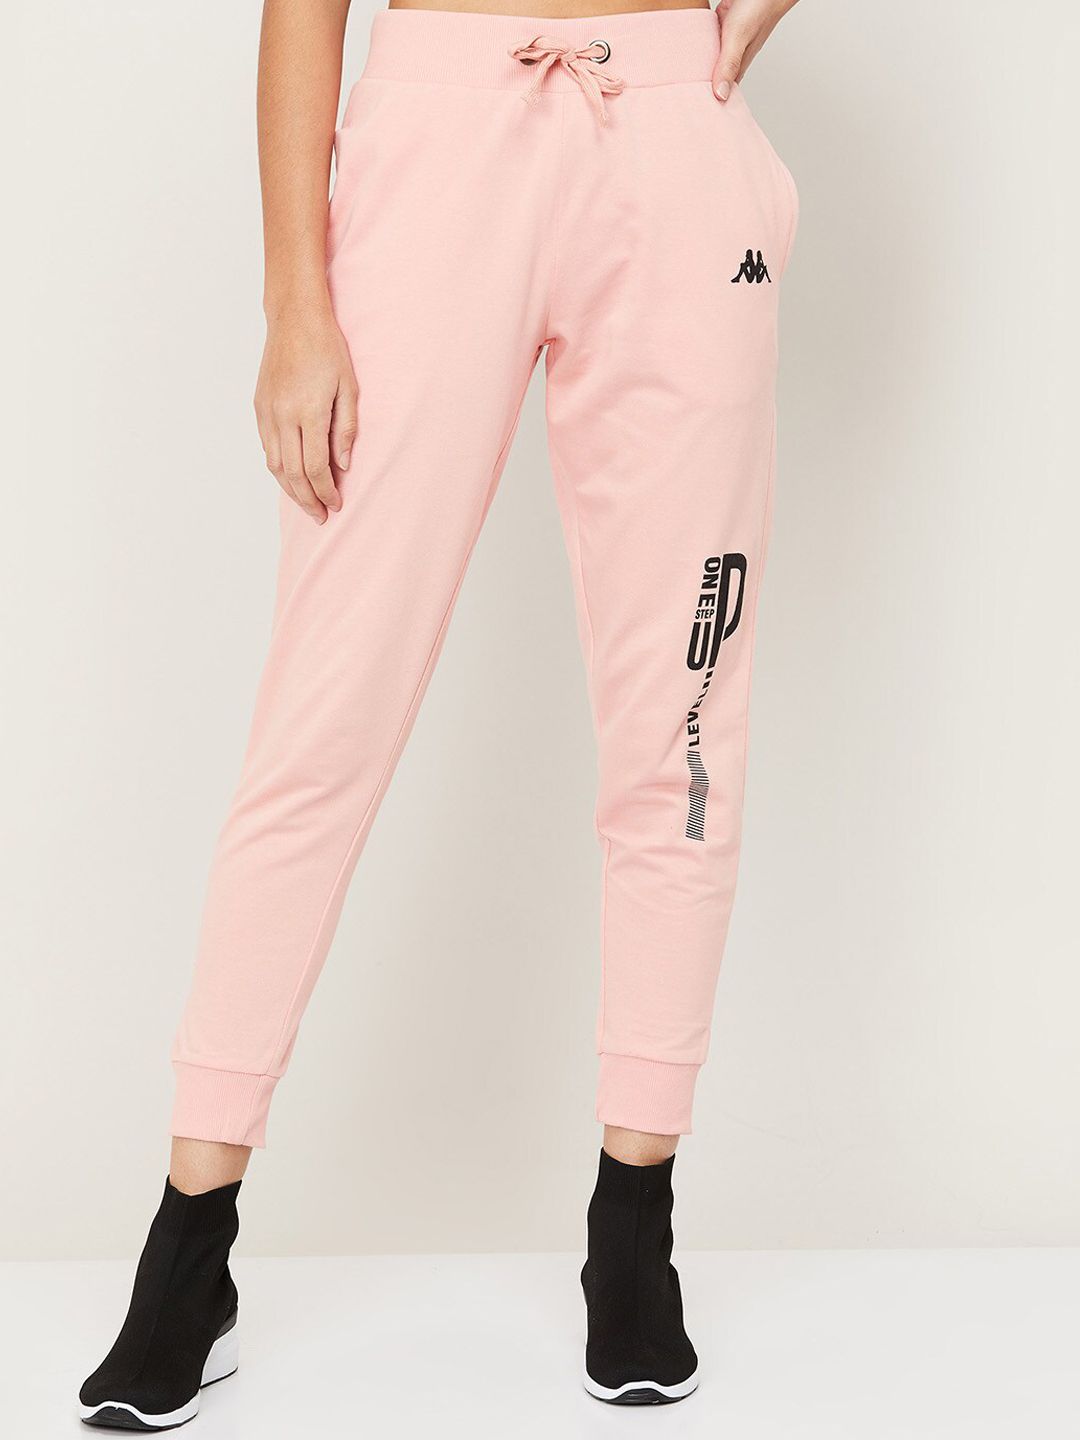 Kappa Women Pink & Black Solid Regular Fit Cotton Joggers Price in India